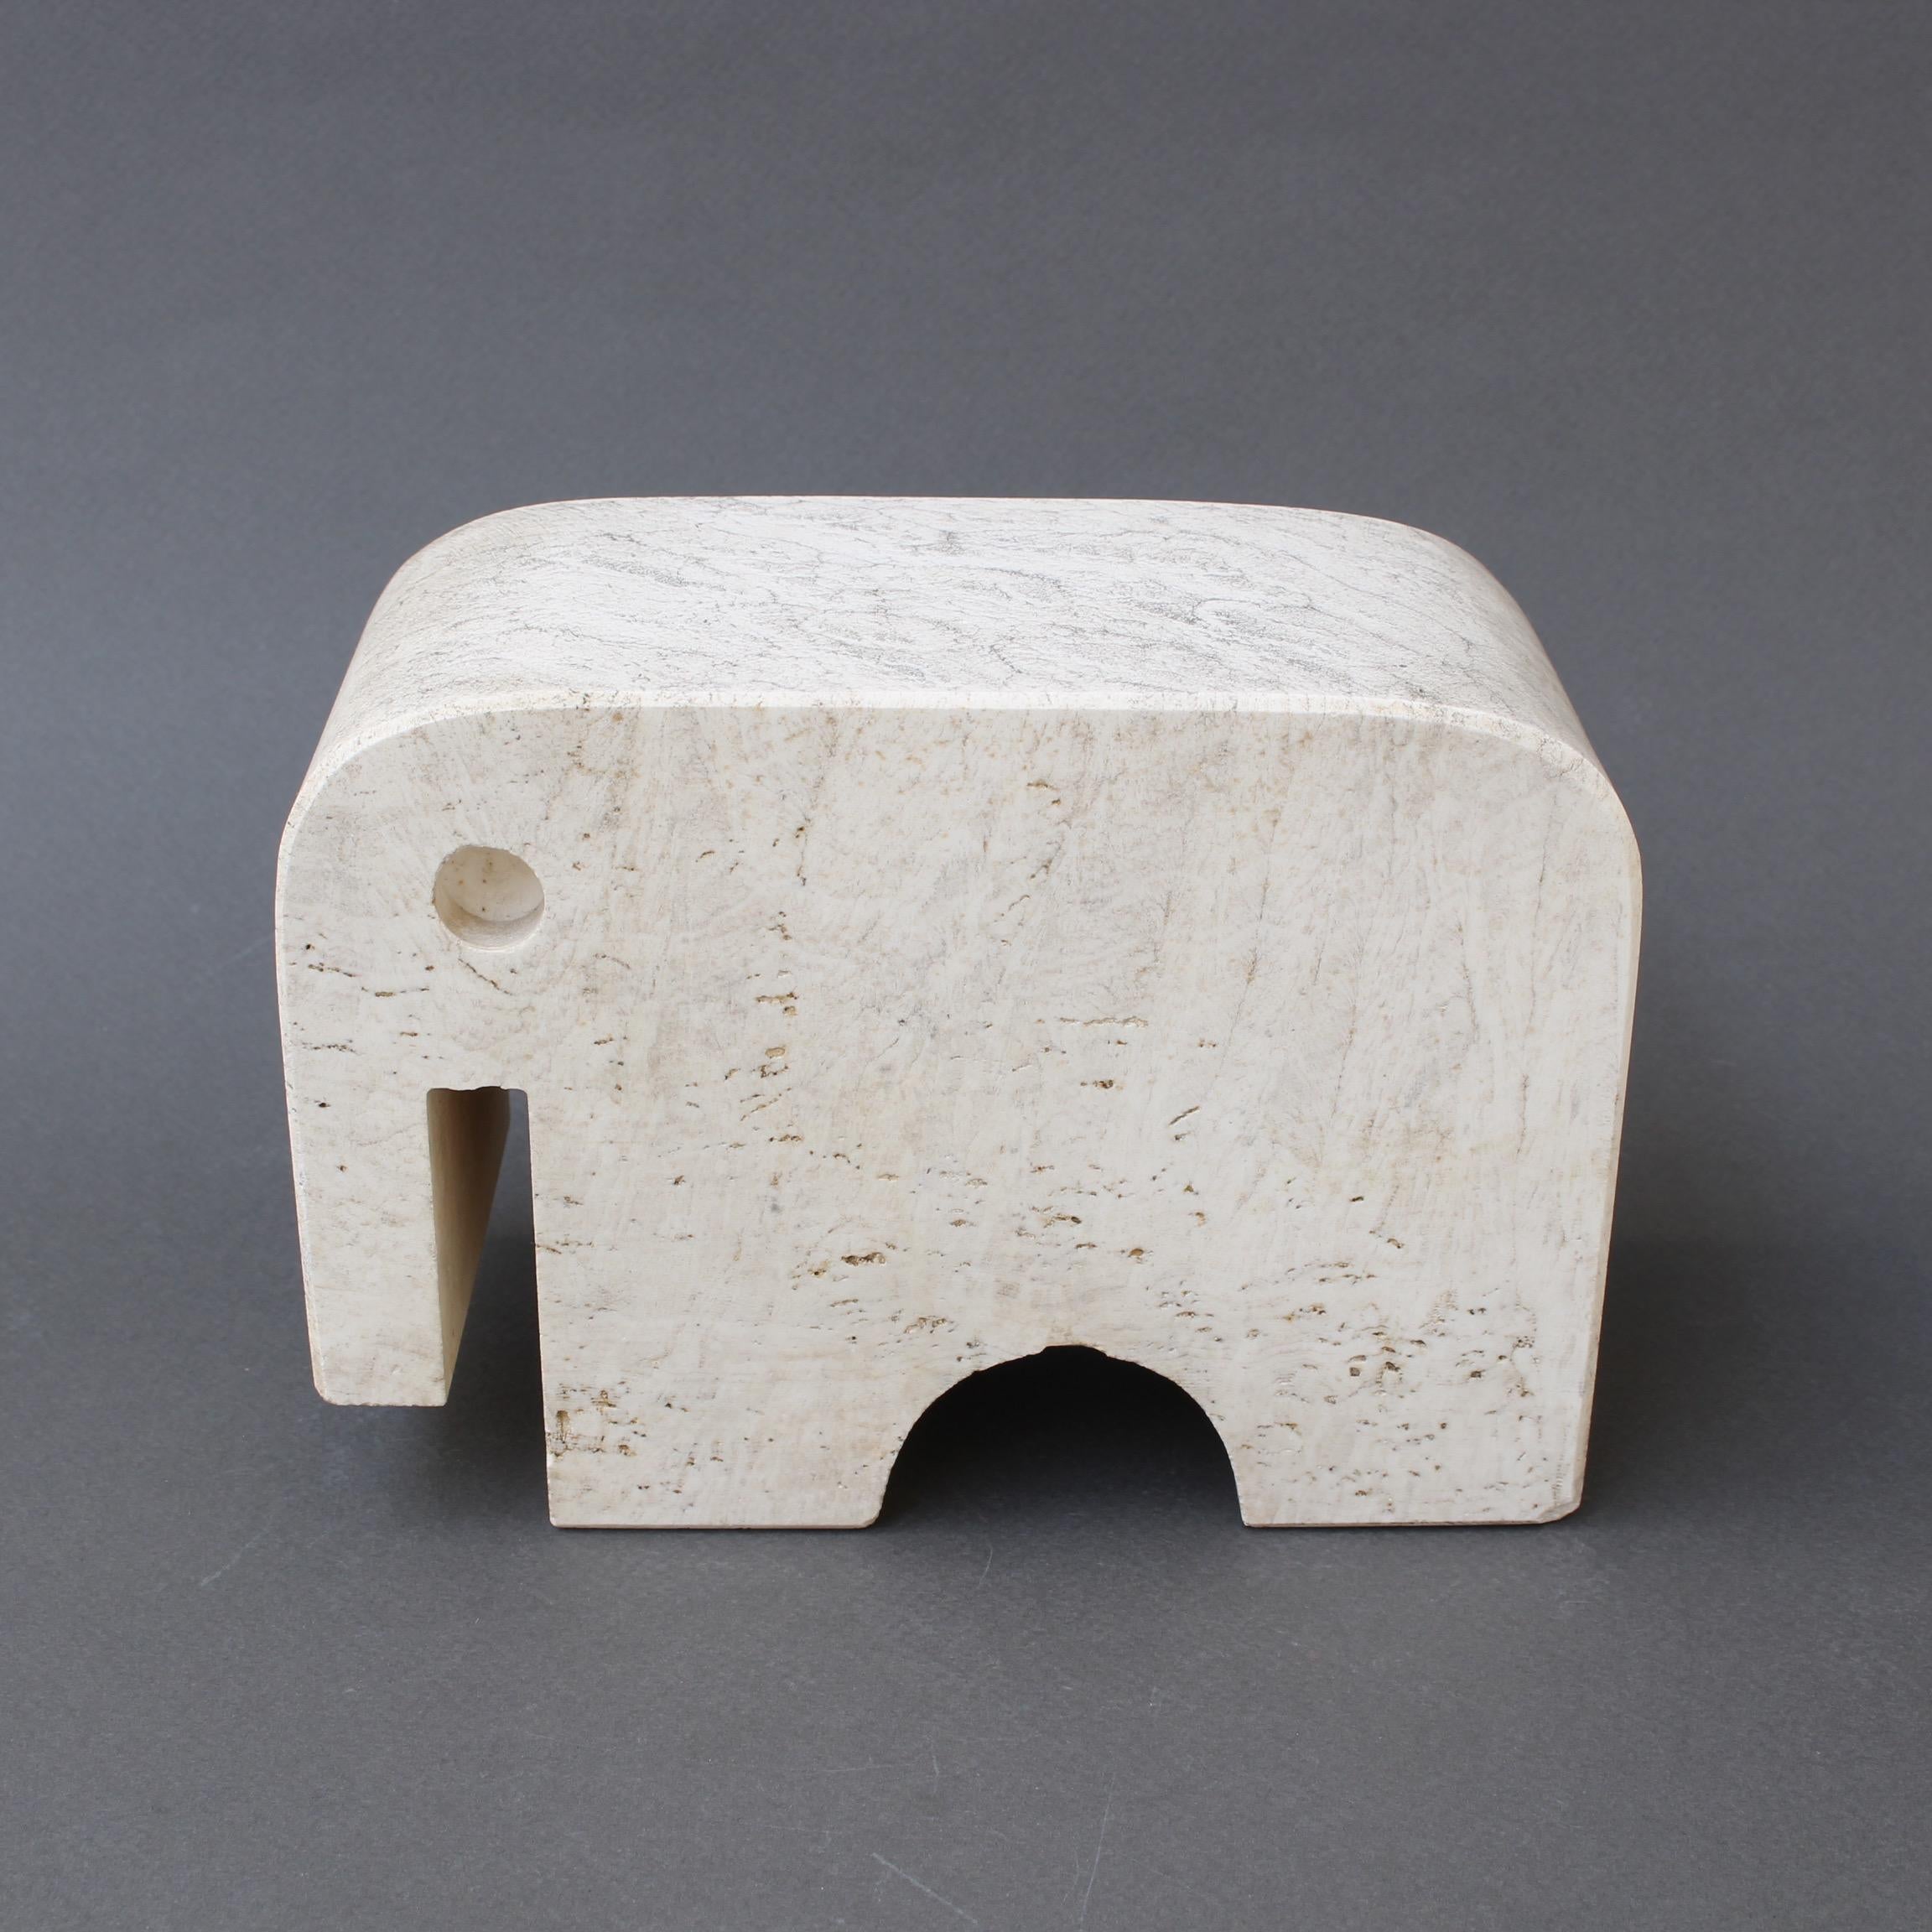 Travertine elephant table sculpture by Mannelli Bros., Florence, Italy (circa 1970s). Joyful travertine stylized elephant will delight art lovers and collectors. Minimalist in style with soft curves and lines, this sculpture may be displayed as a